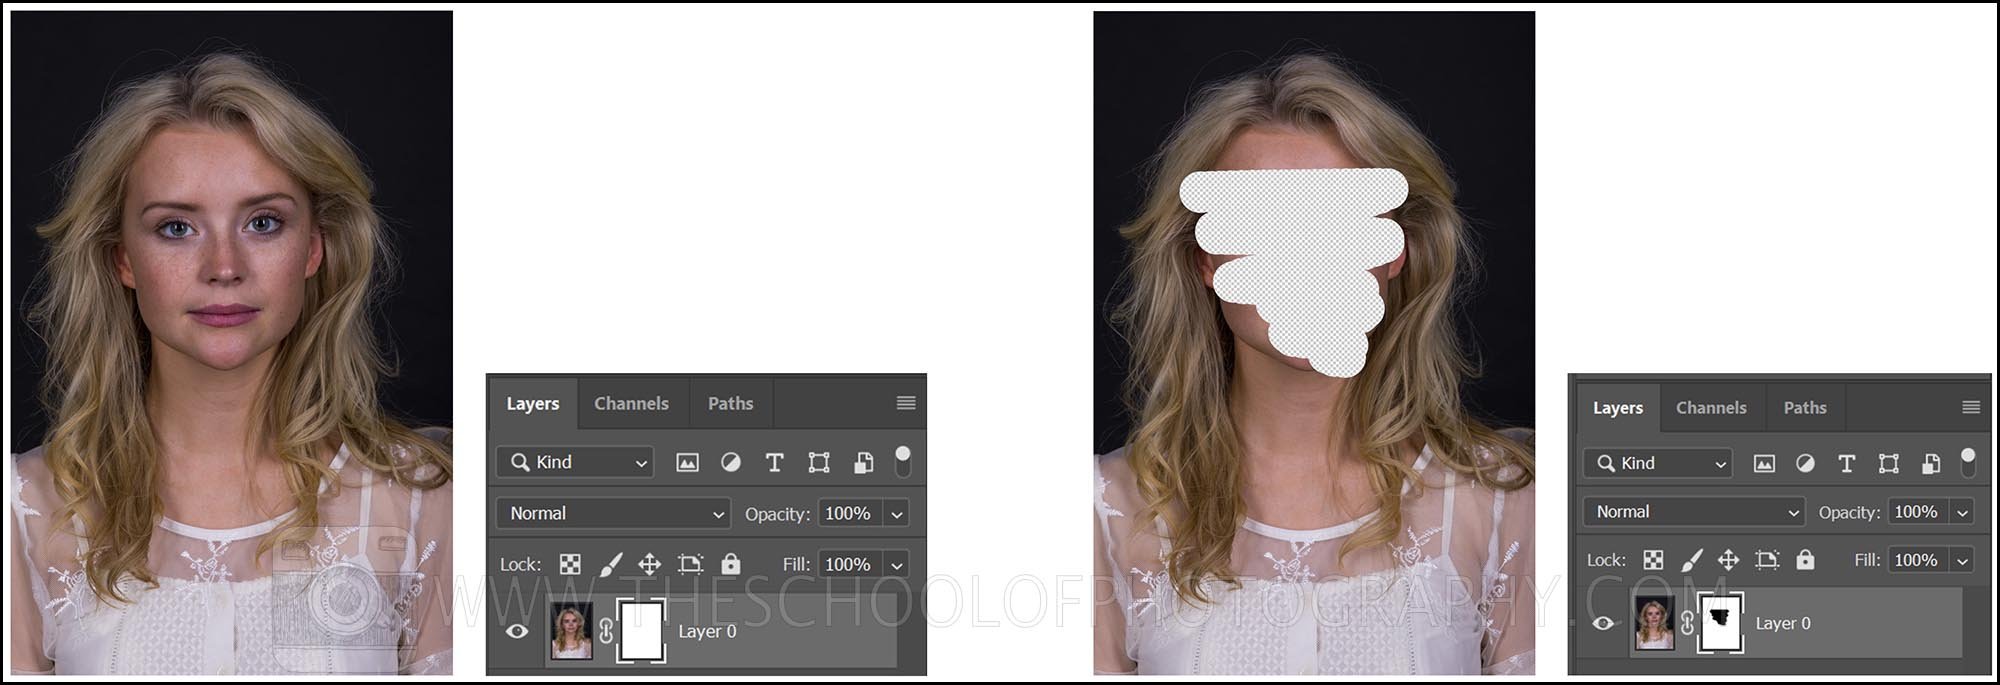 Example of layer masking in Photoshop